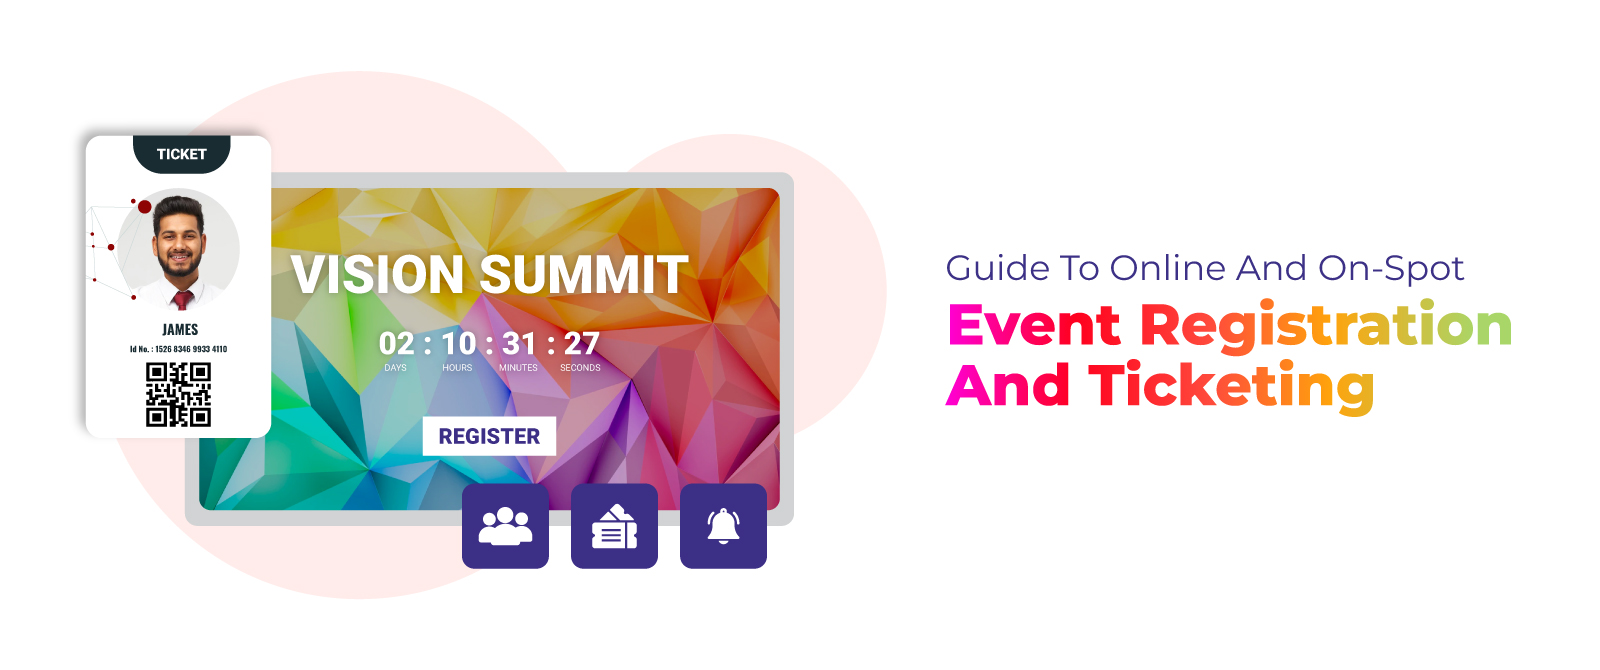 Guide To Online and On-Spot Event Registration and Ticketing